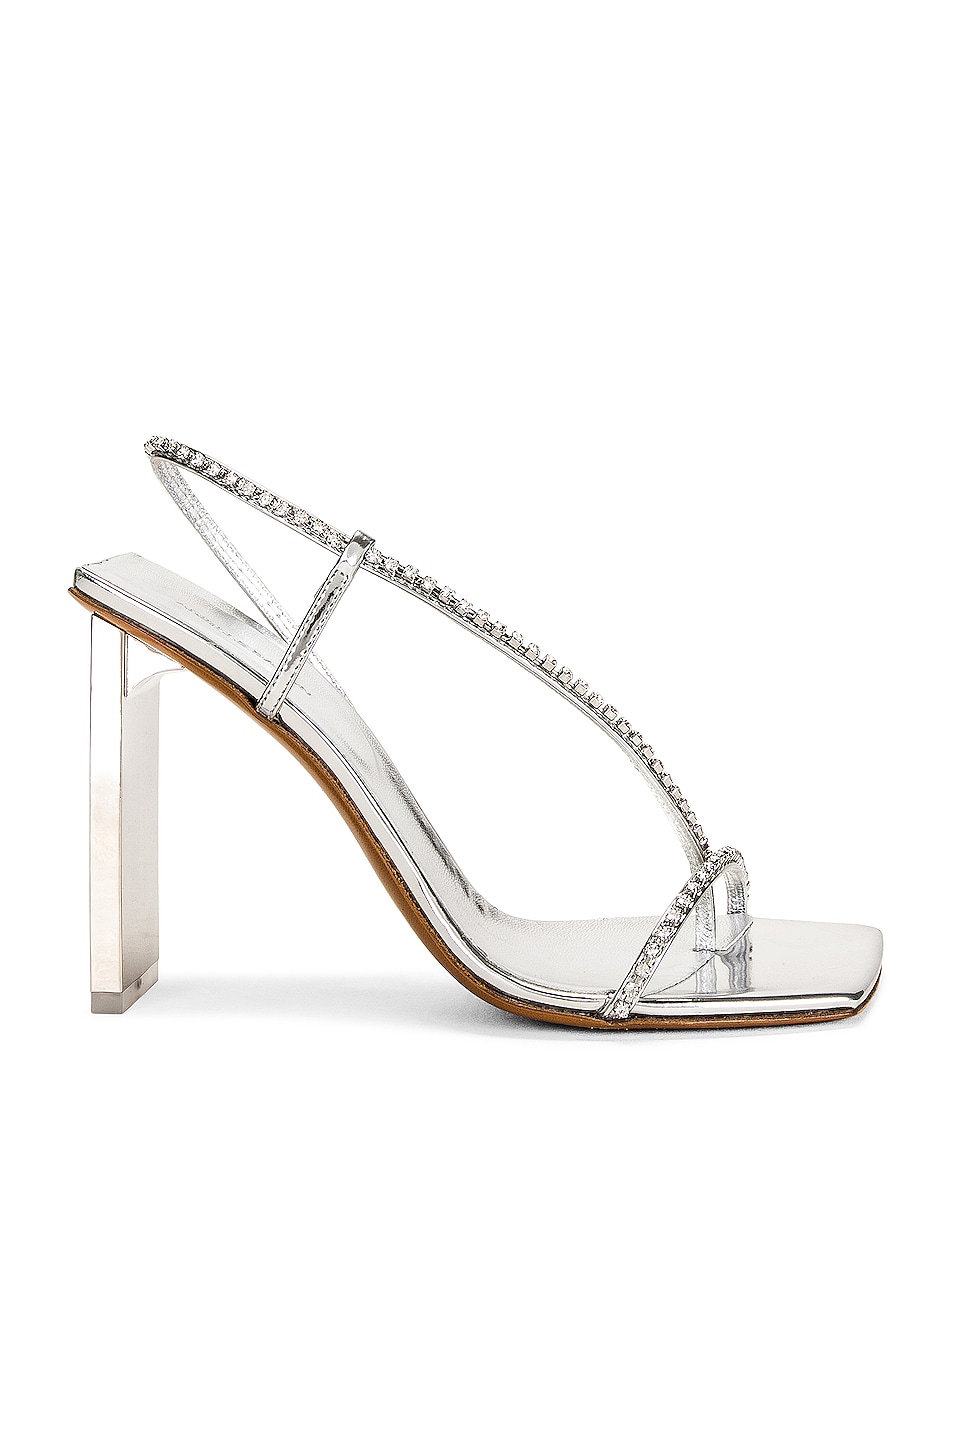 Image 1 of Arielle Baron Narcissus 95 Heel in Silver Metallic Crystal